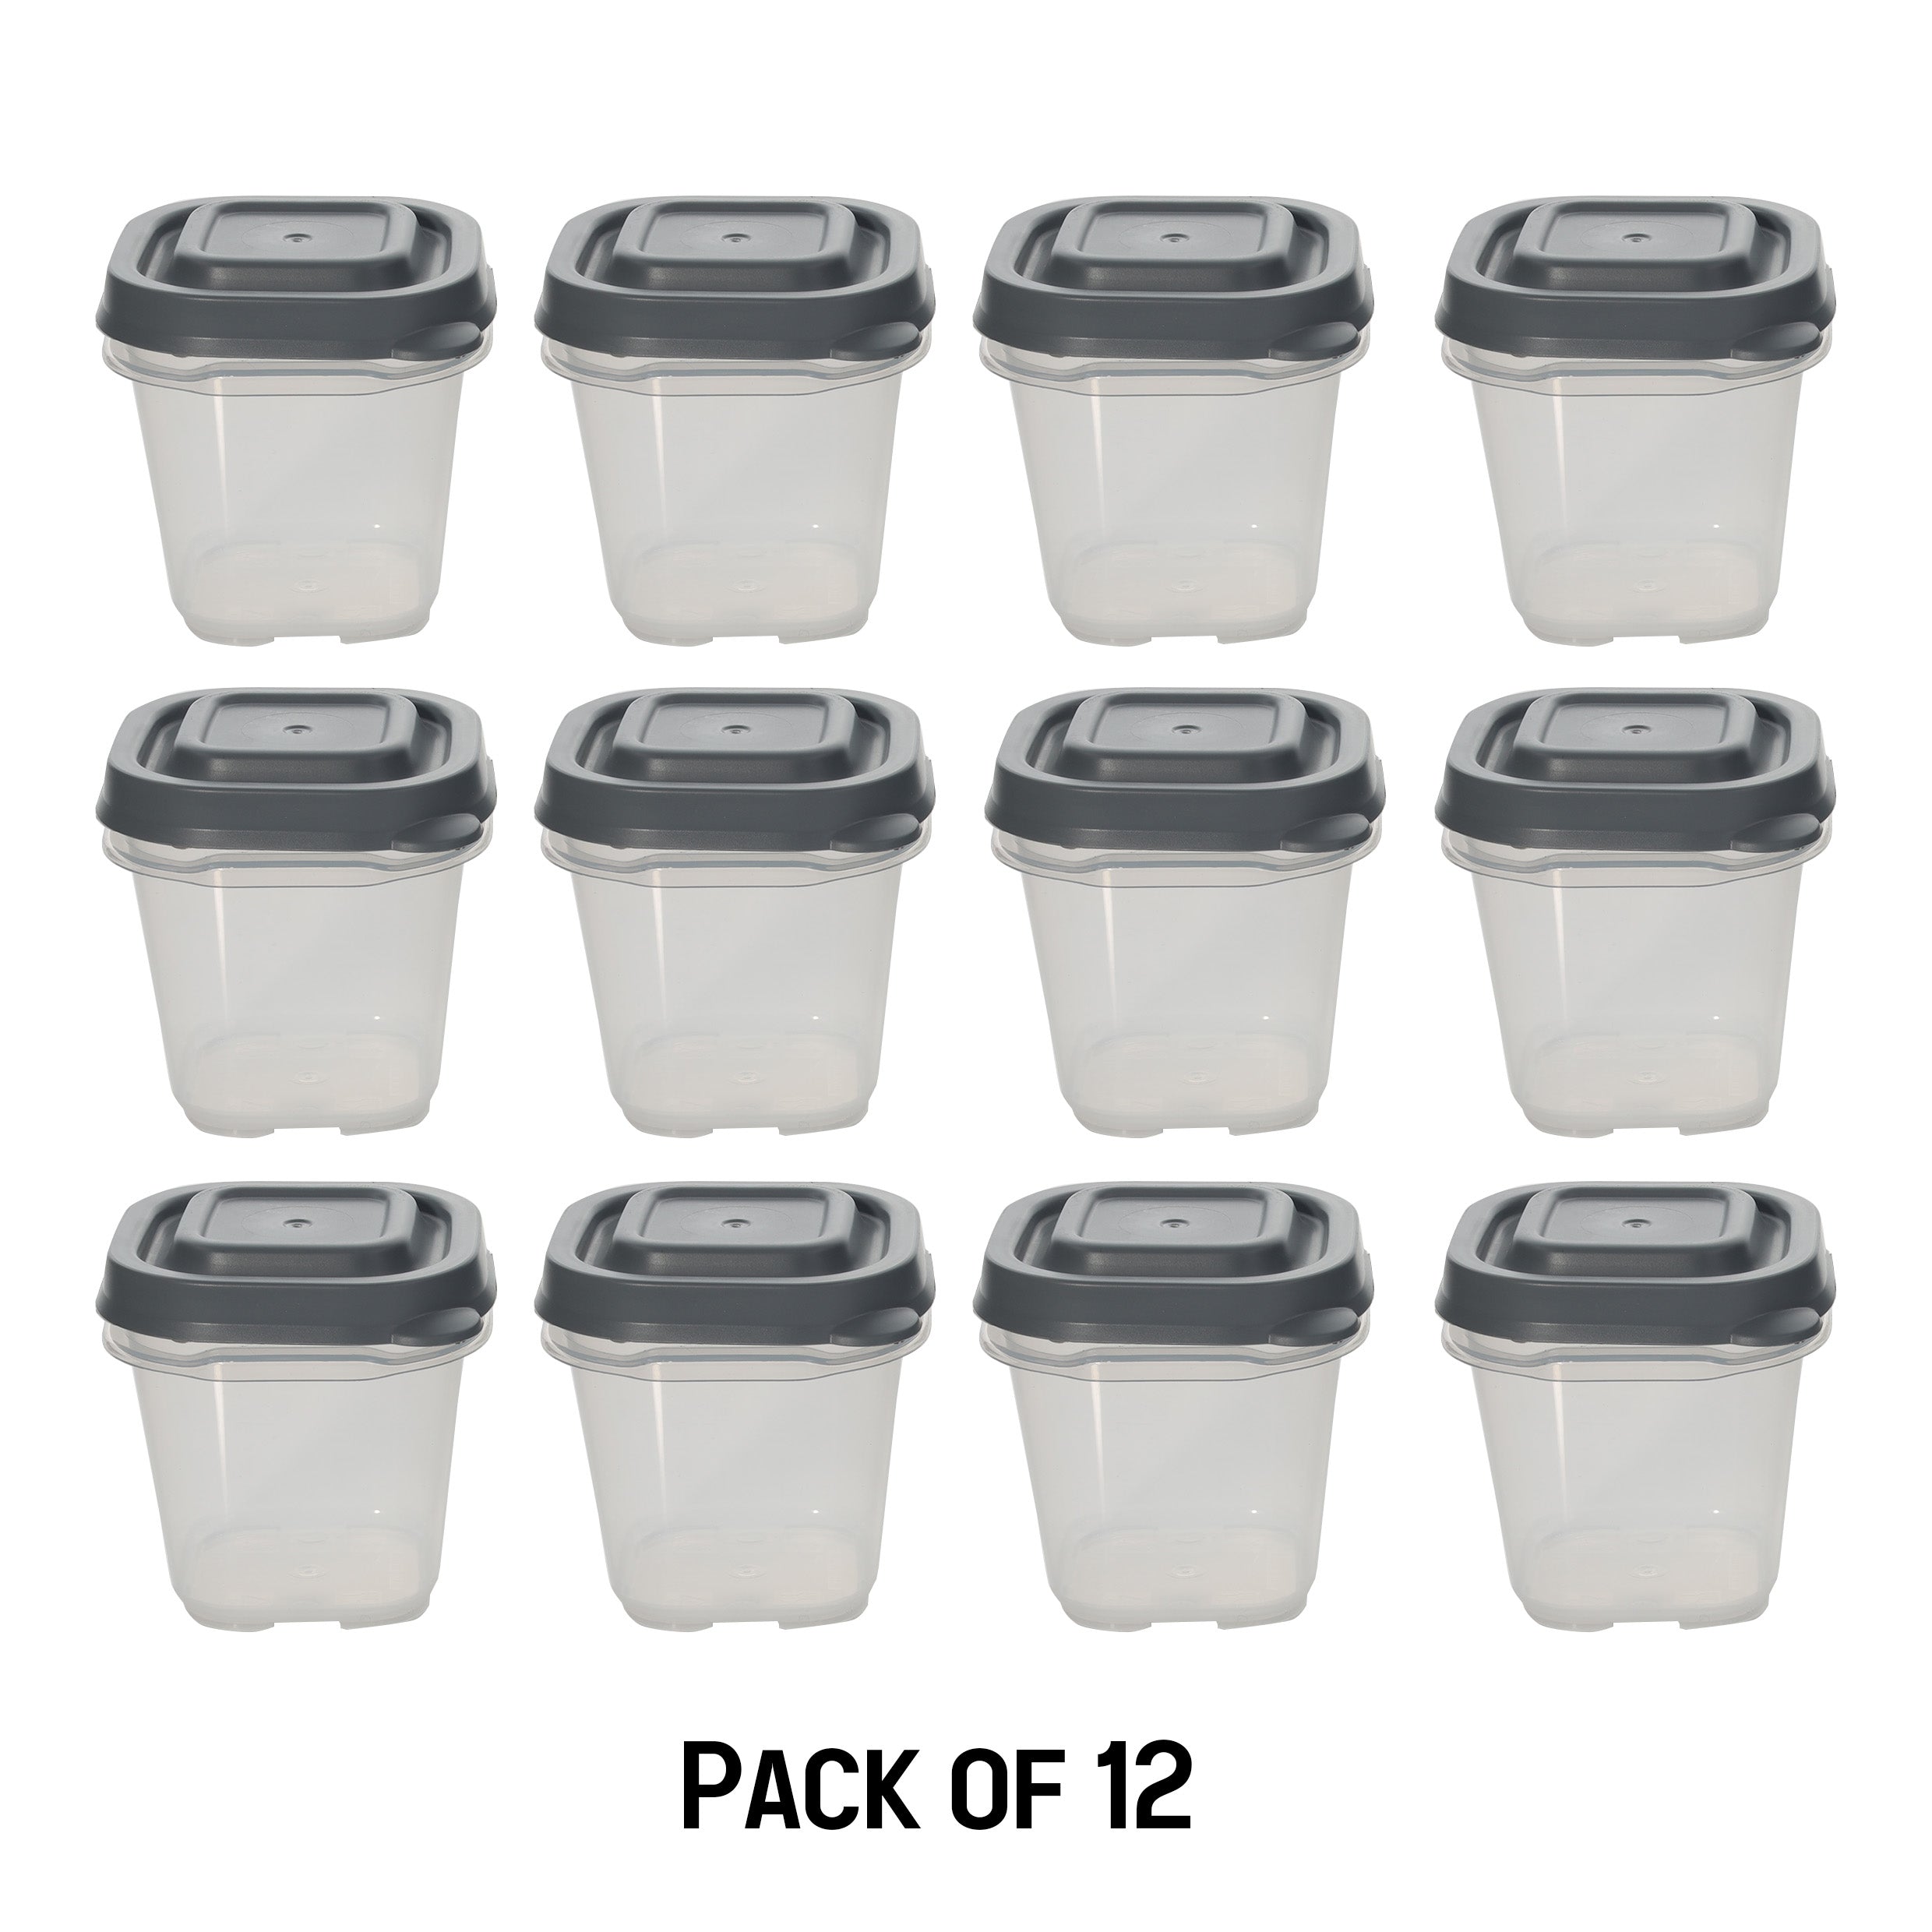 American Maid 0.5 Cup/3.99 Oz Storage Containers, Pack of 12